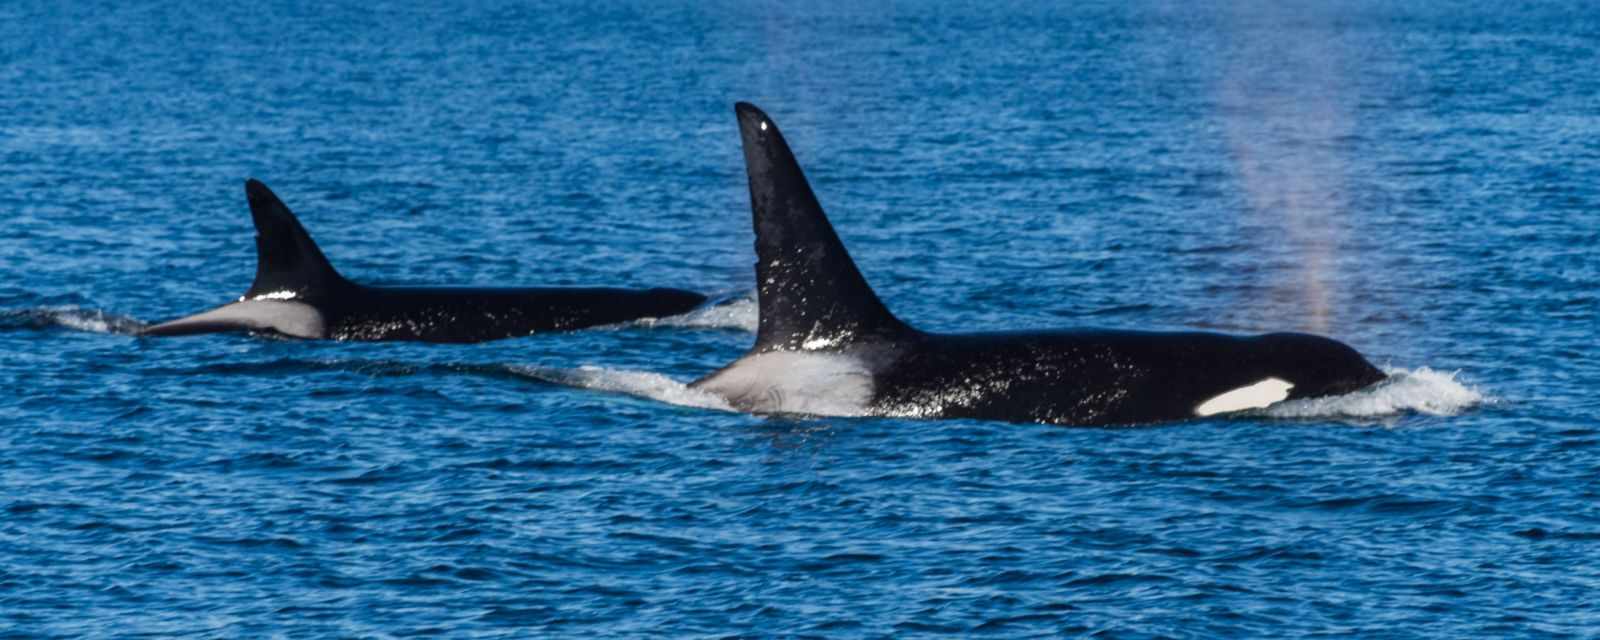 Vancouver Island Whale Watching - Whale and Orca Guide